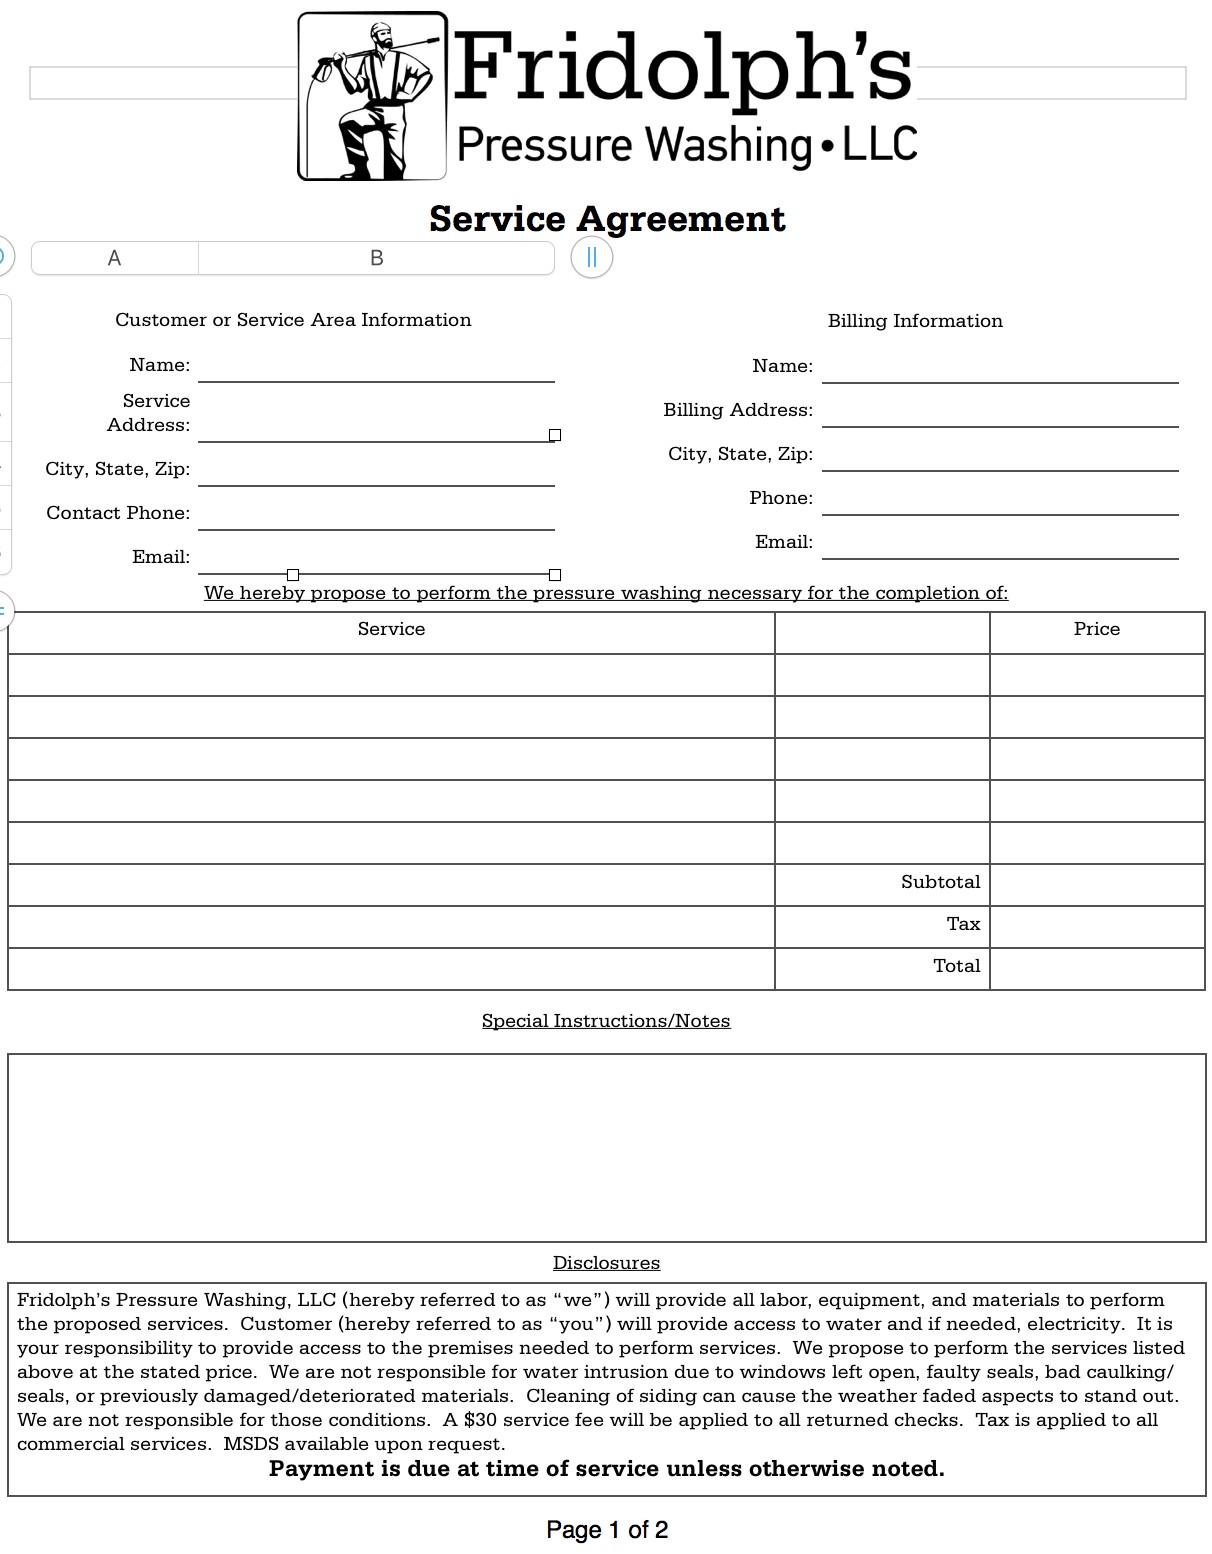 Service Agreement Residential Pressure Washing Resource Document Contract